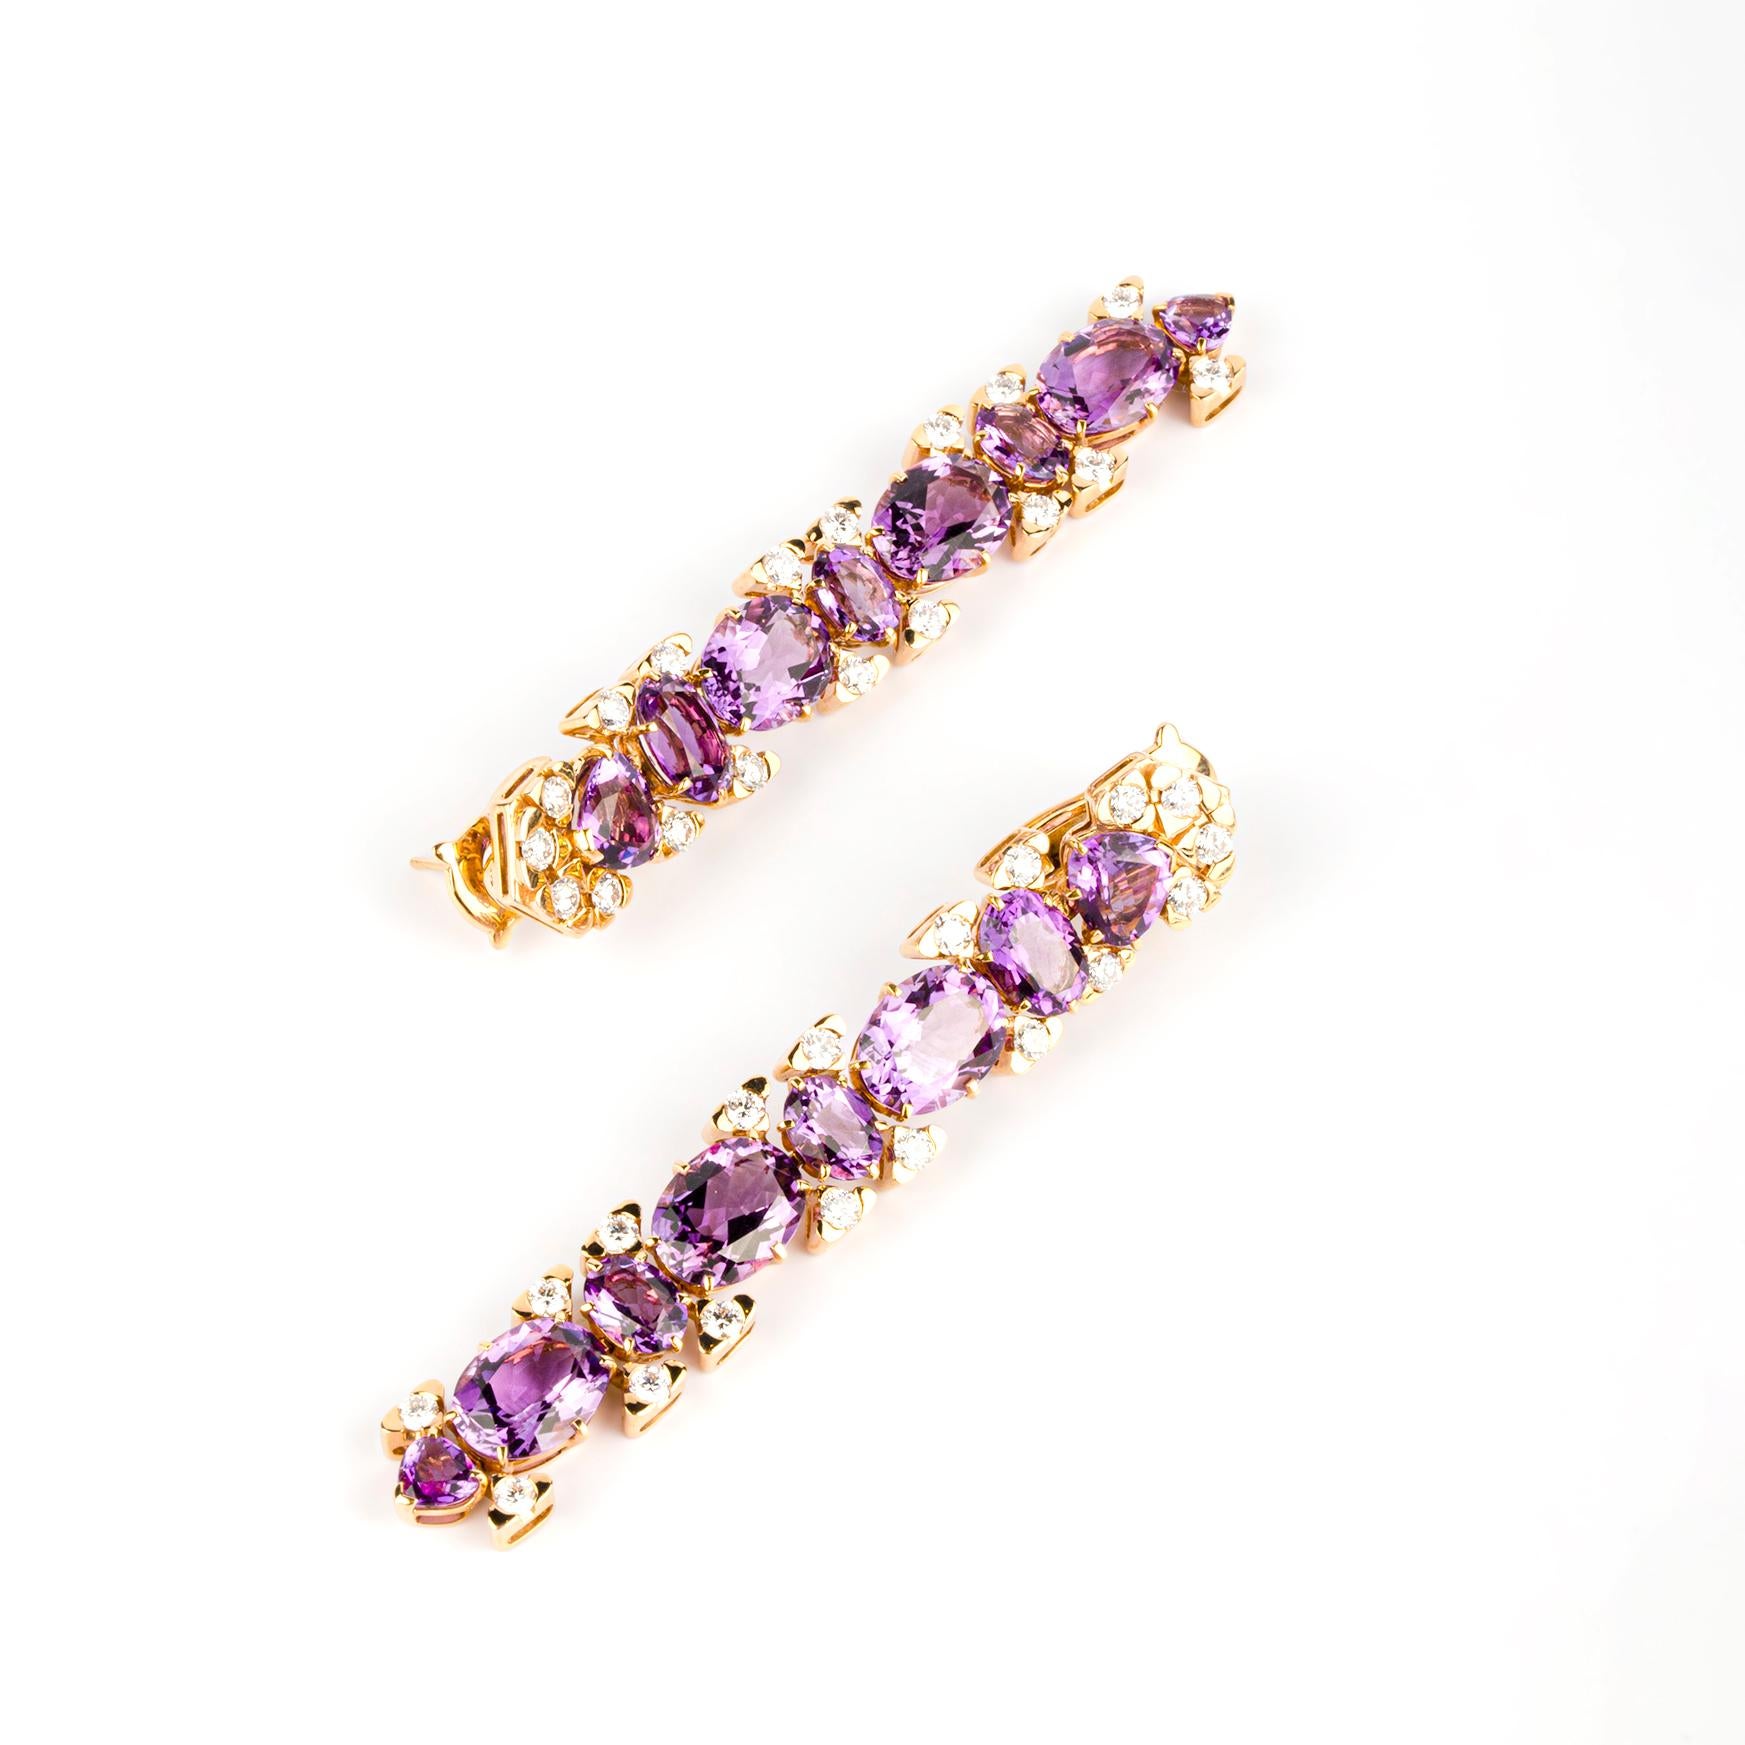 Marina B floral earrings with diamonds and amethyst. Made in Italy, circa 1990.